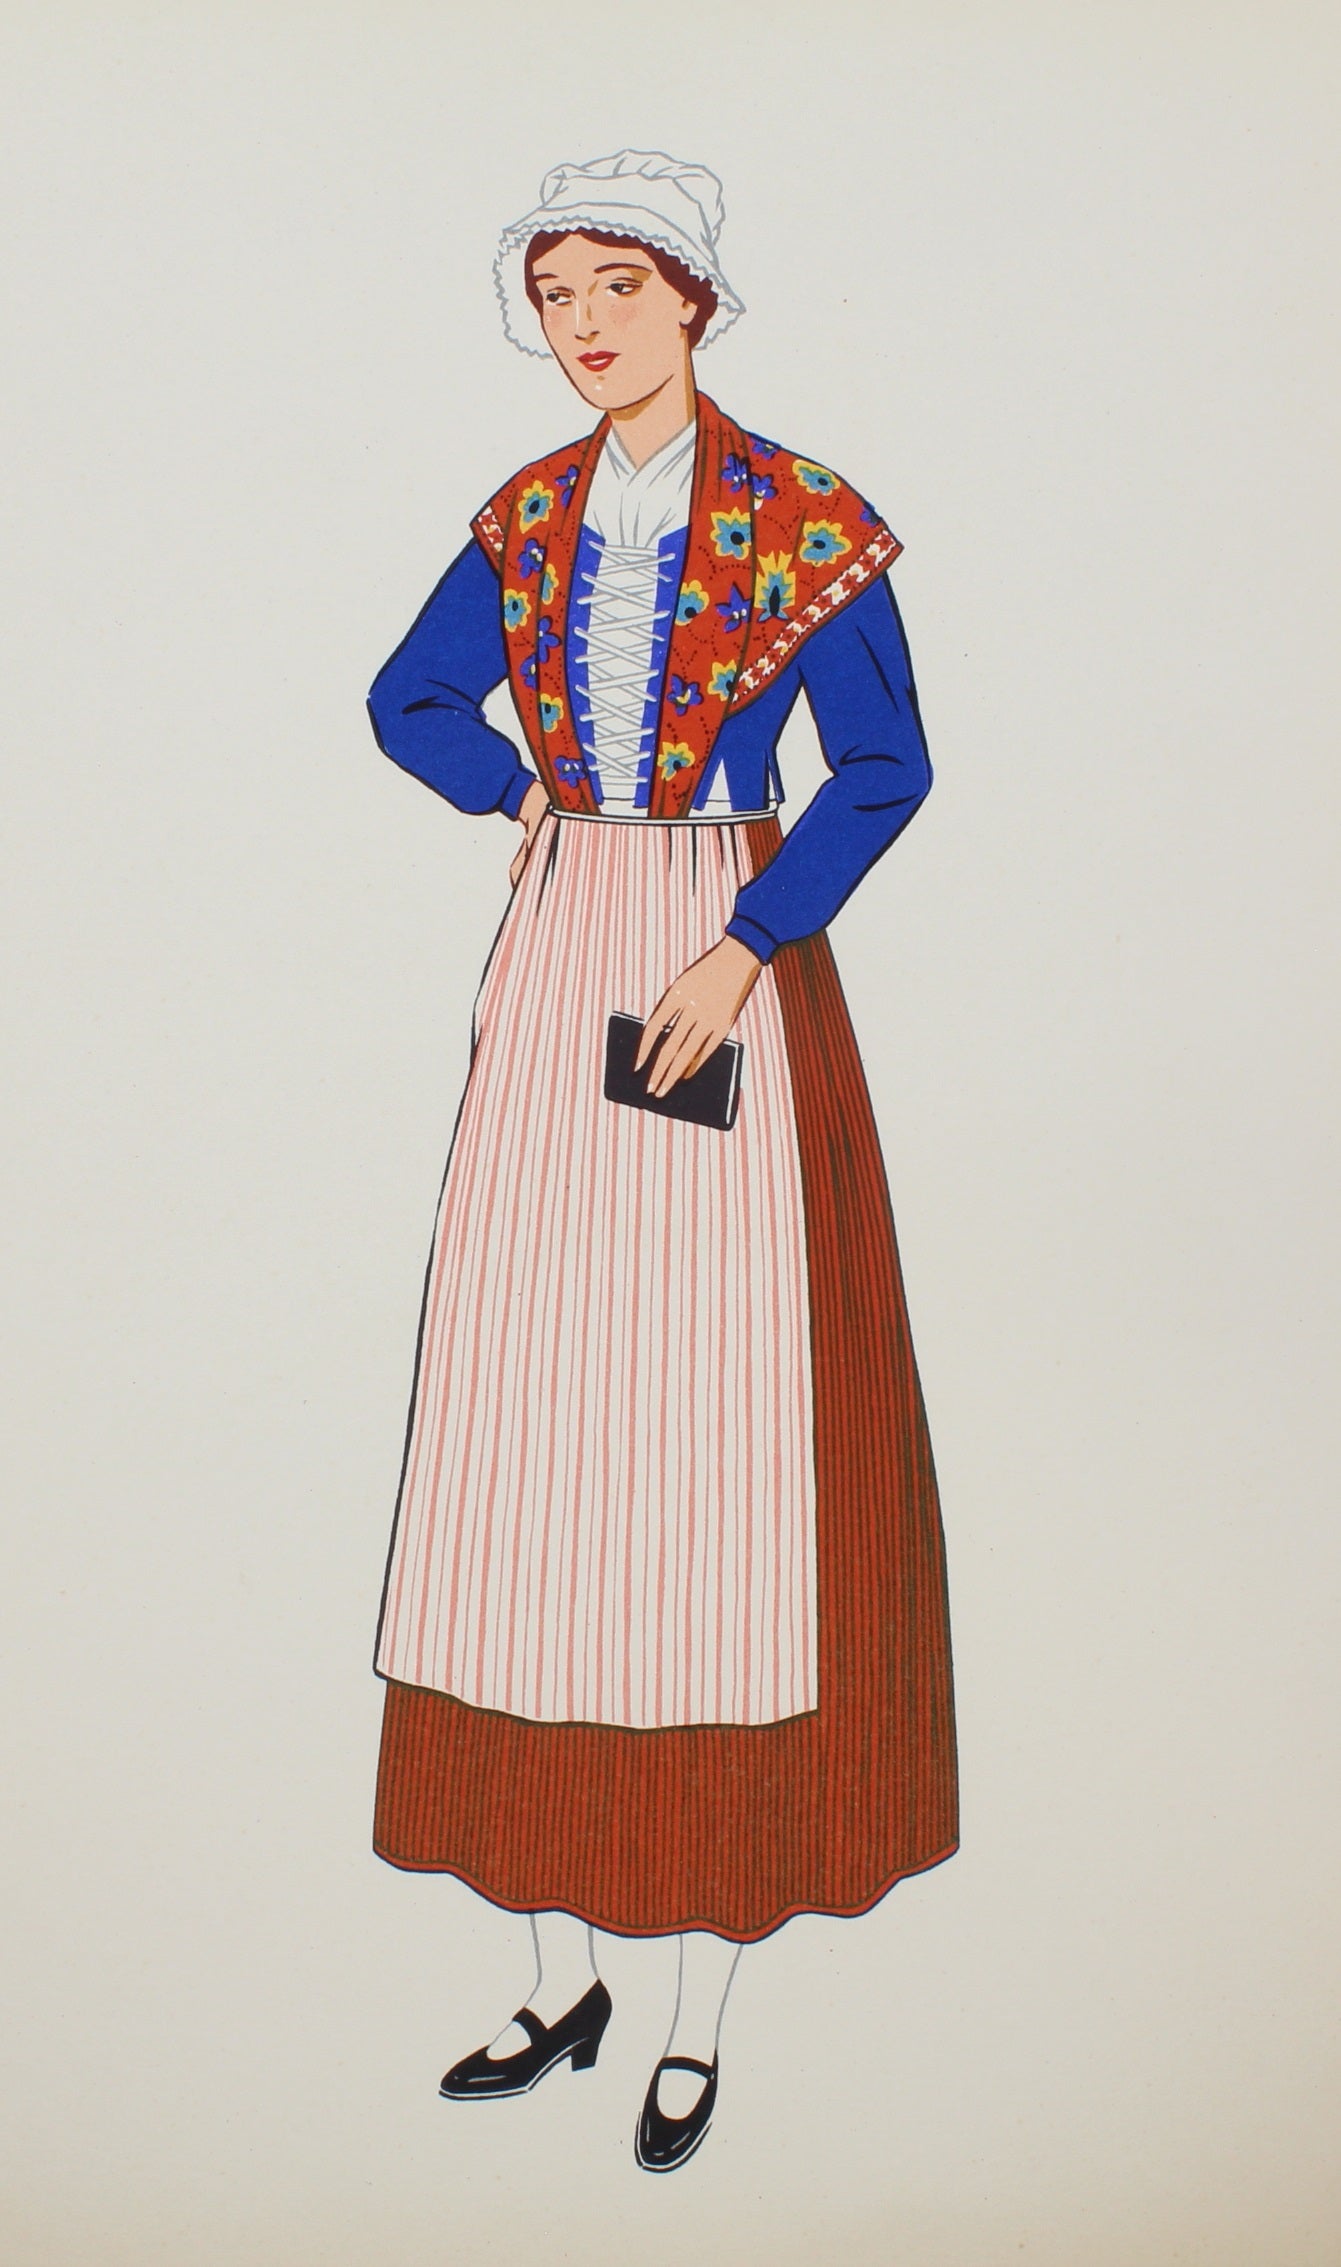 Costume, French Regional, Lepage- Medvey, Costume of a Woman, Franche-Comte, 1939